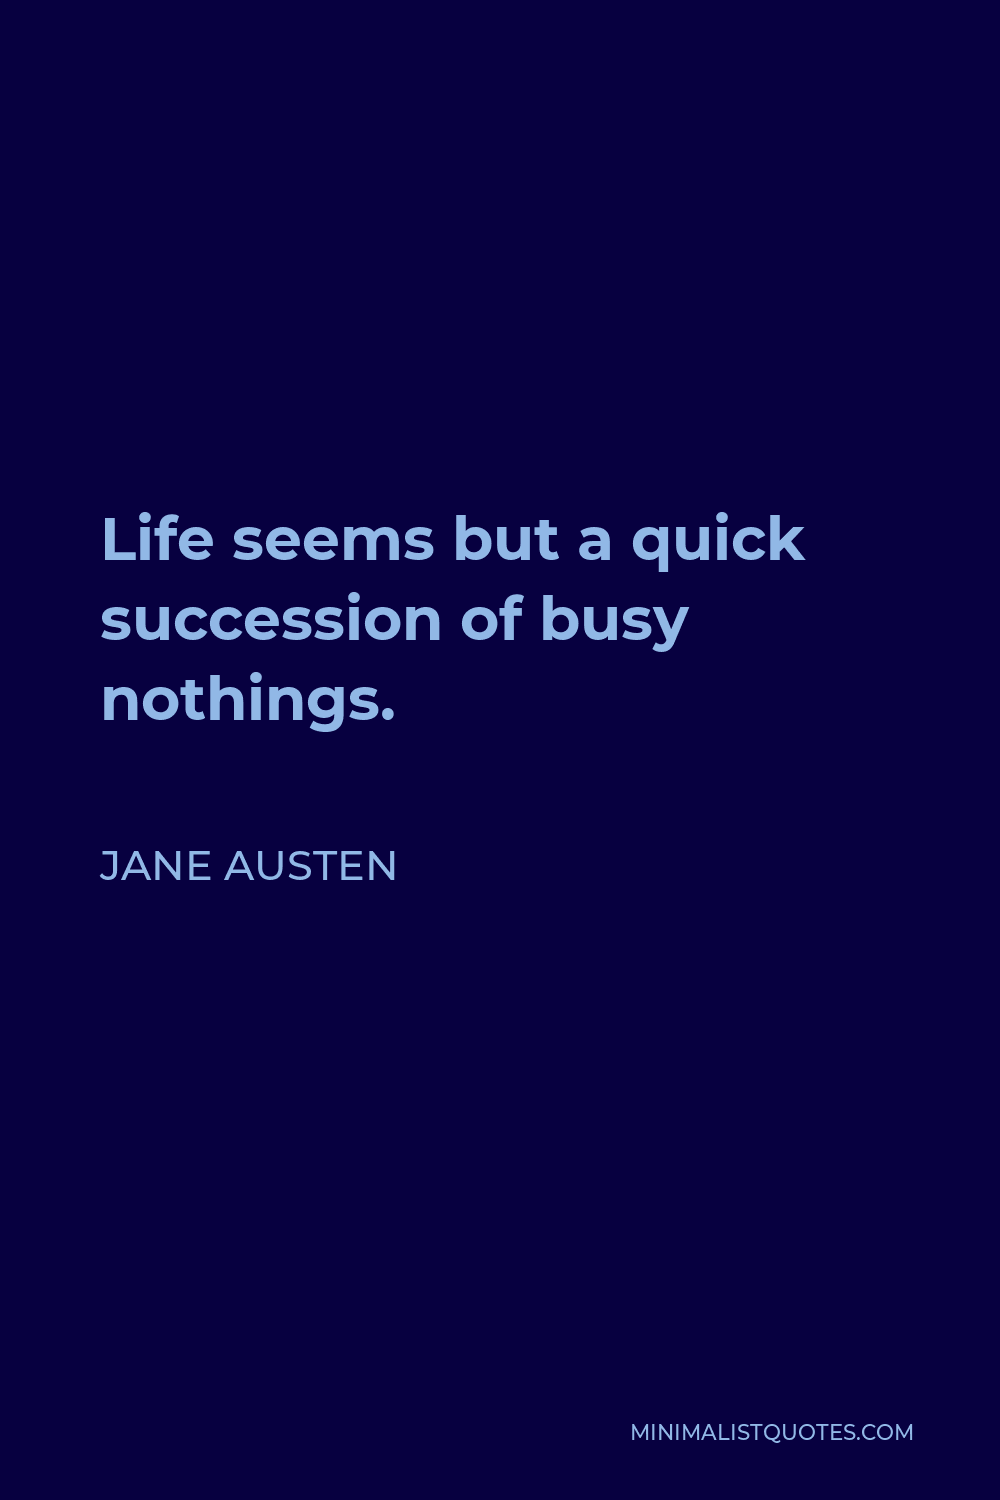 Jane Austen Quote - Life seems but a quick succession of busy nothings.